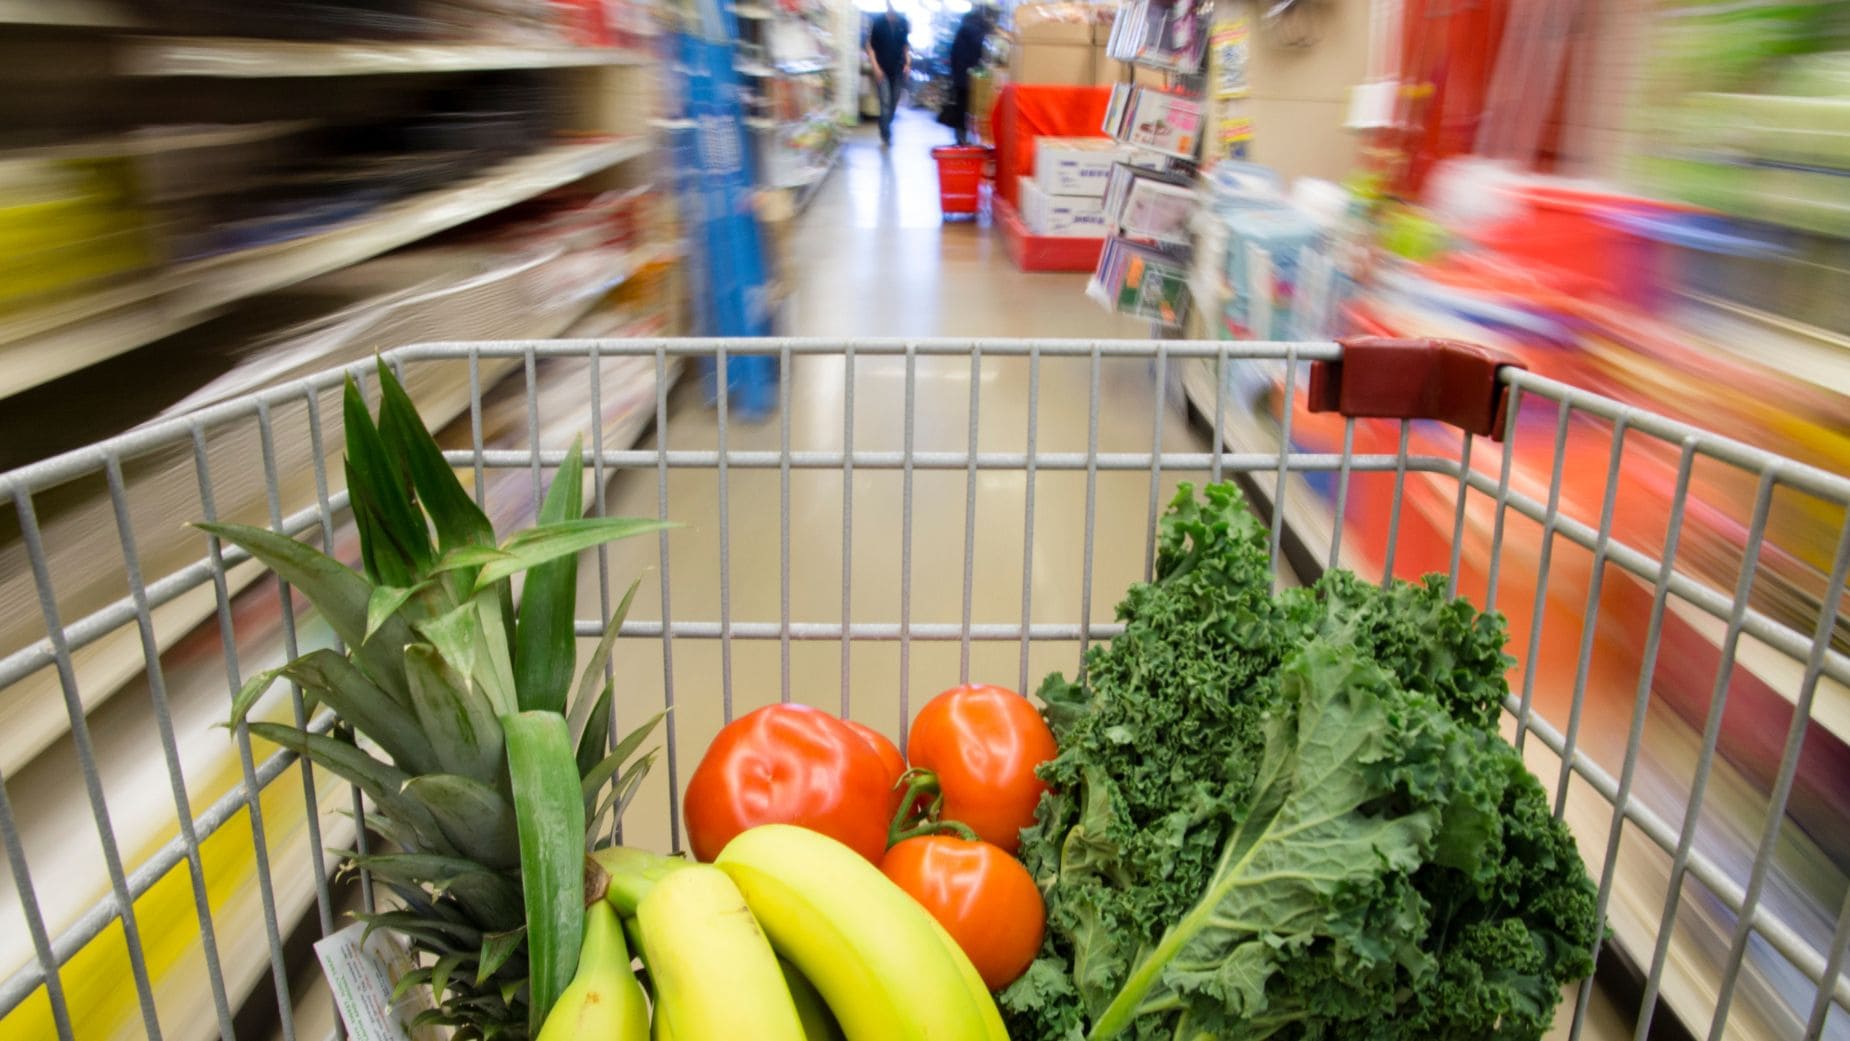 Your SNAP Food Stamps could be on the way